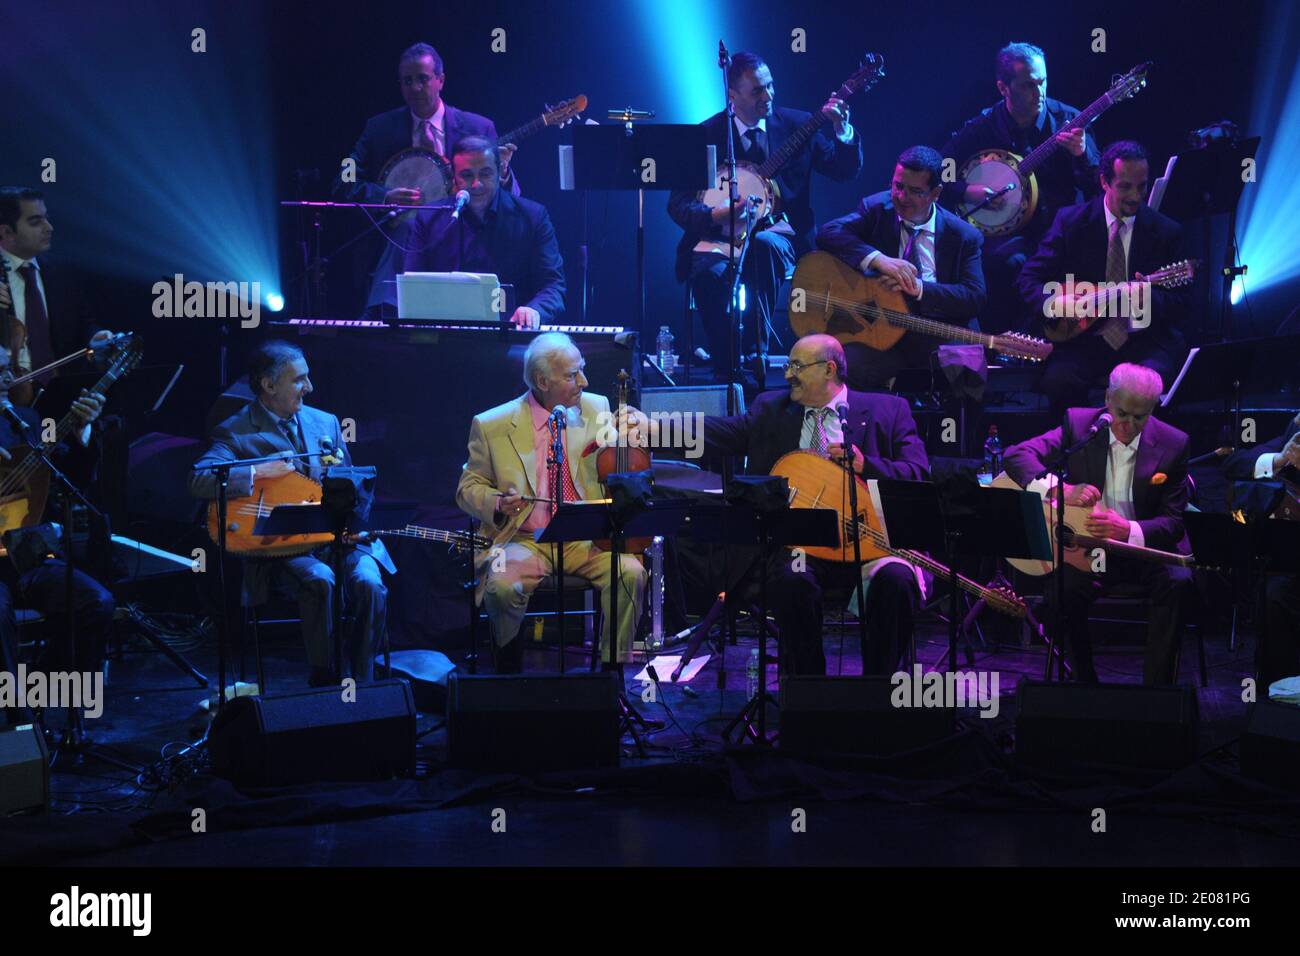 French famous 'pied noir' actor Robert Castel plays with the 'El Gusto' orchestra of chaabi music at the 'Grand Rex' theatre on January 9 and 10, 2012. 'El Gusto' used to be an orchestra playing in Algeria in the 1950s, and got reunited recently after a documentary movie on them. Photo by Ammar Abd Rabbo/ABACAPRESS.COM Stock Photo